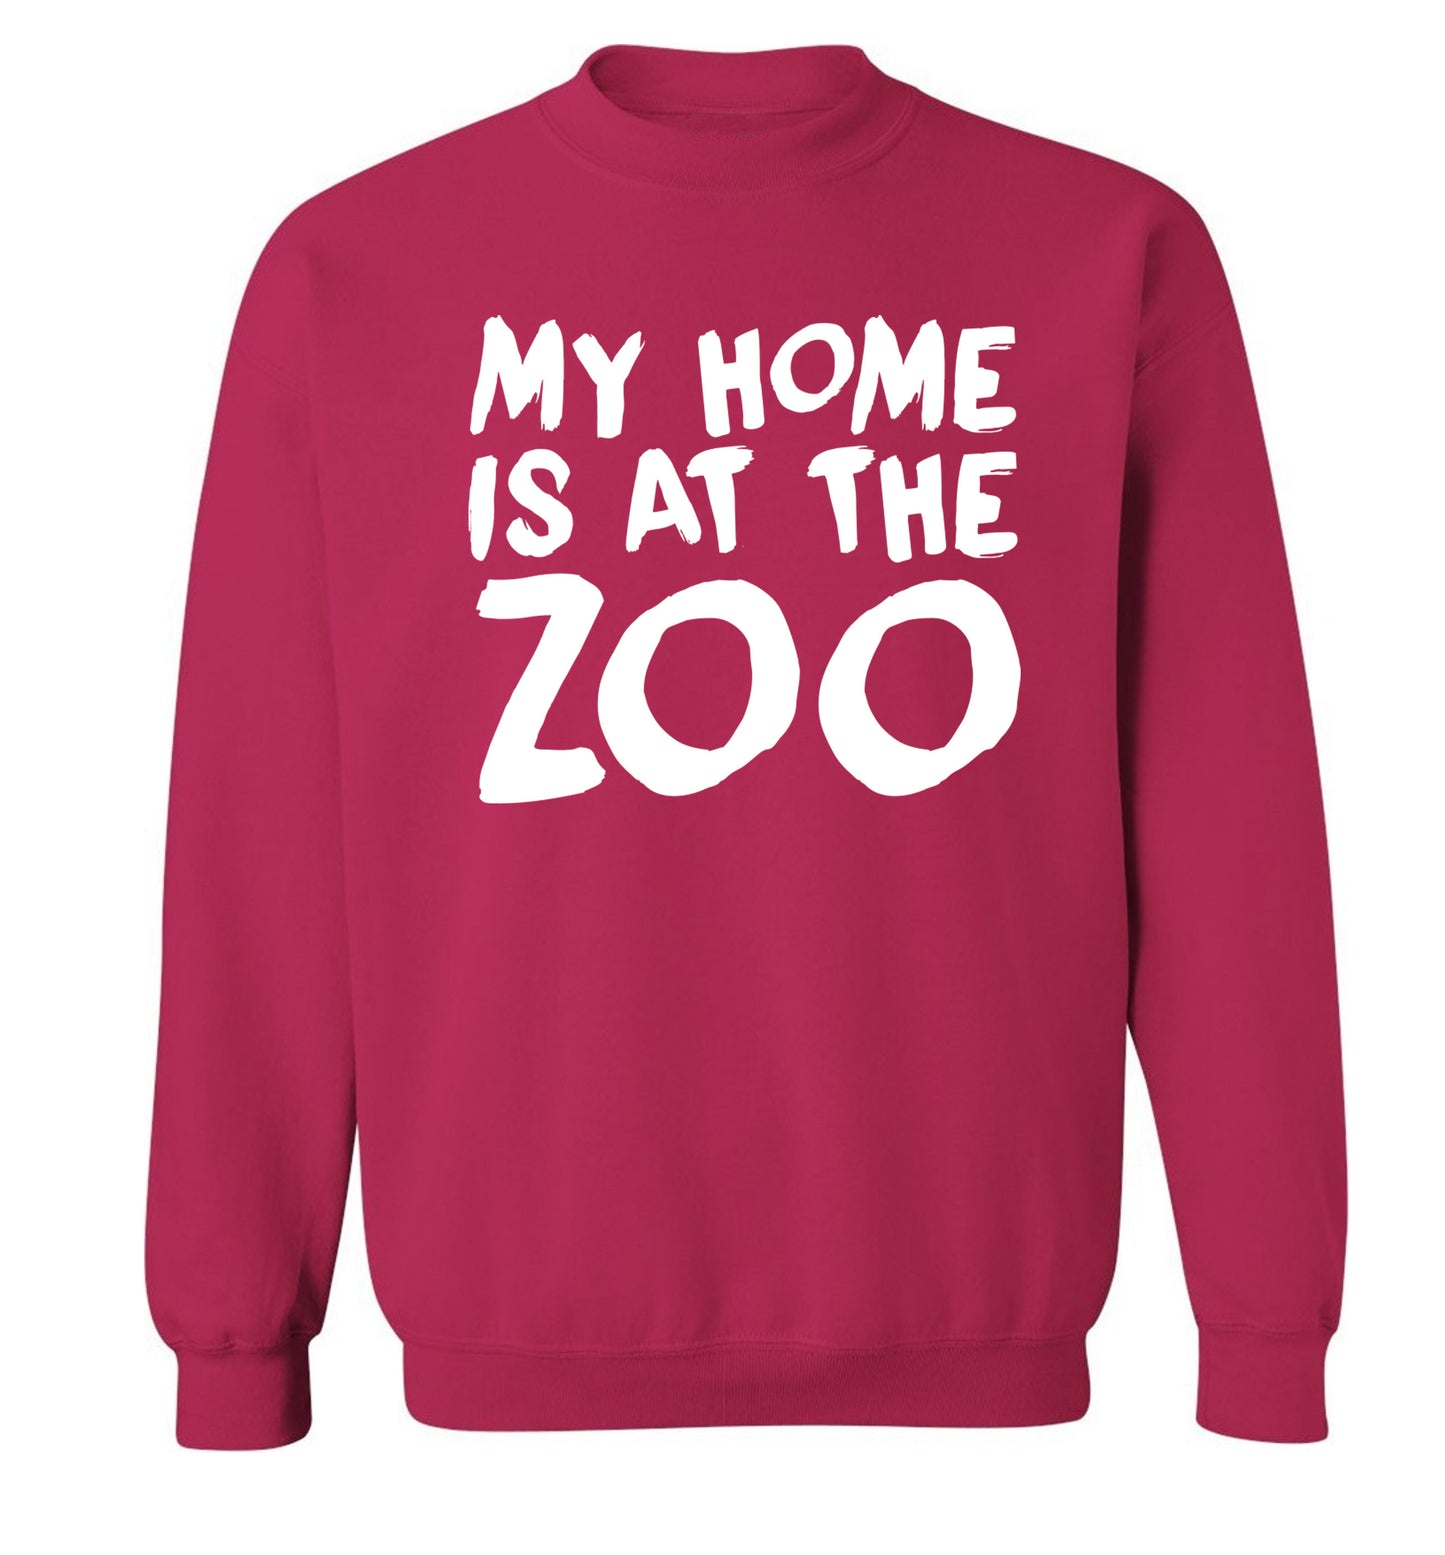 My home is at the zoo Adult's unisex pink Sweater 2XL